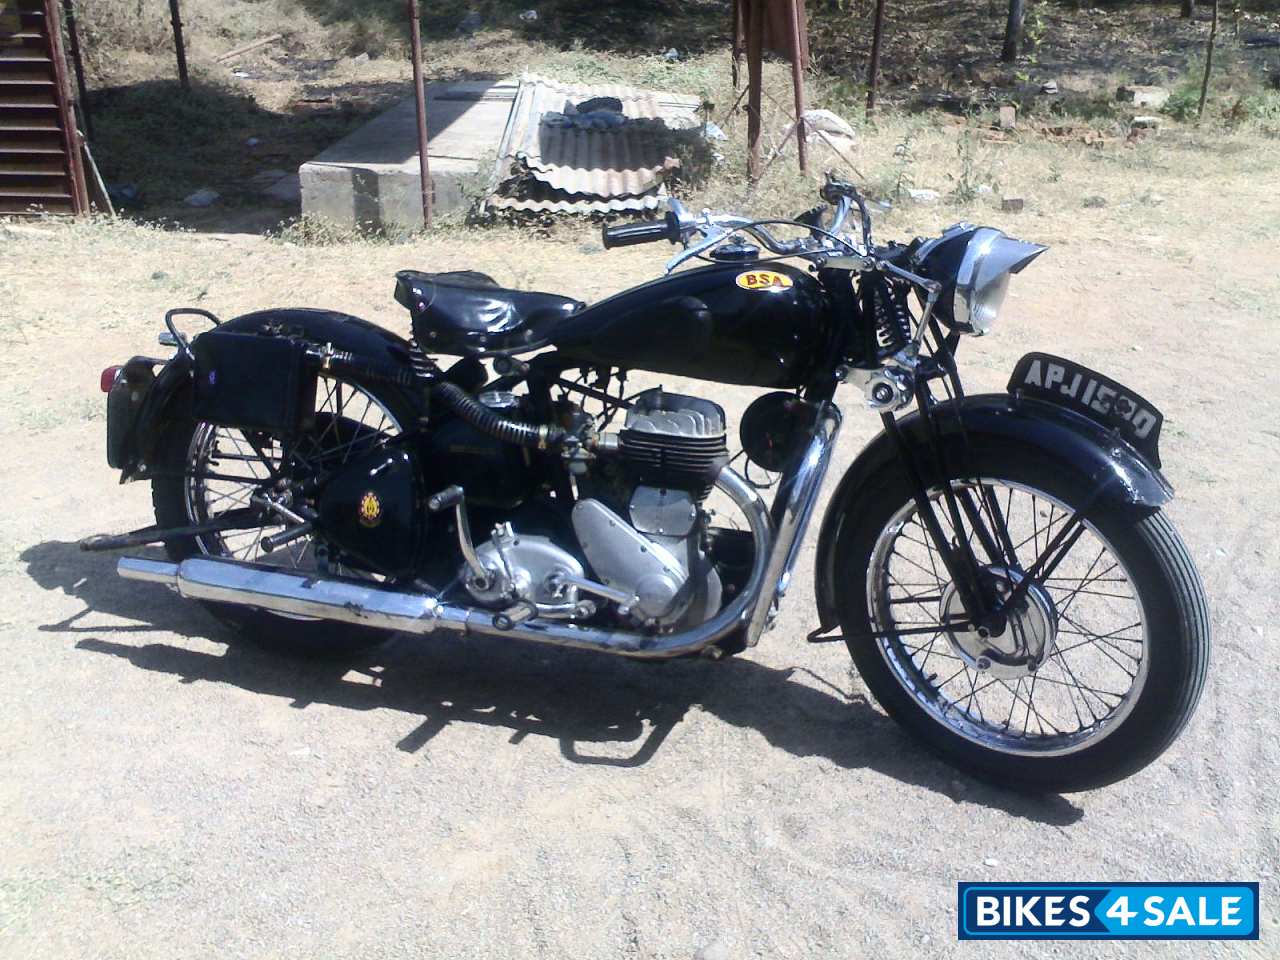 vintage bsa motorcycles for sale